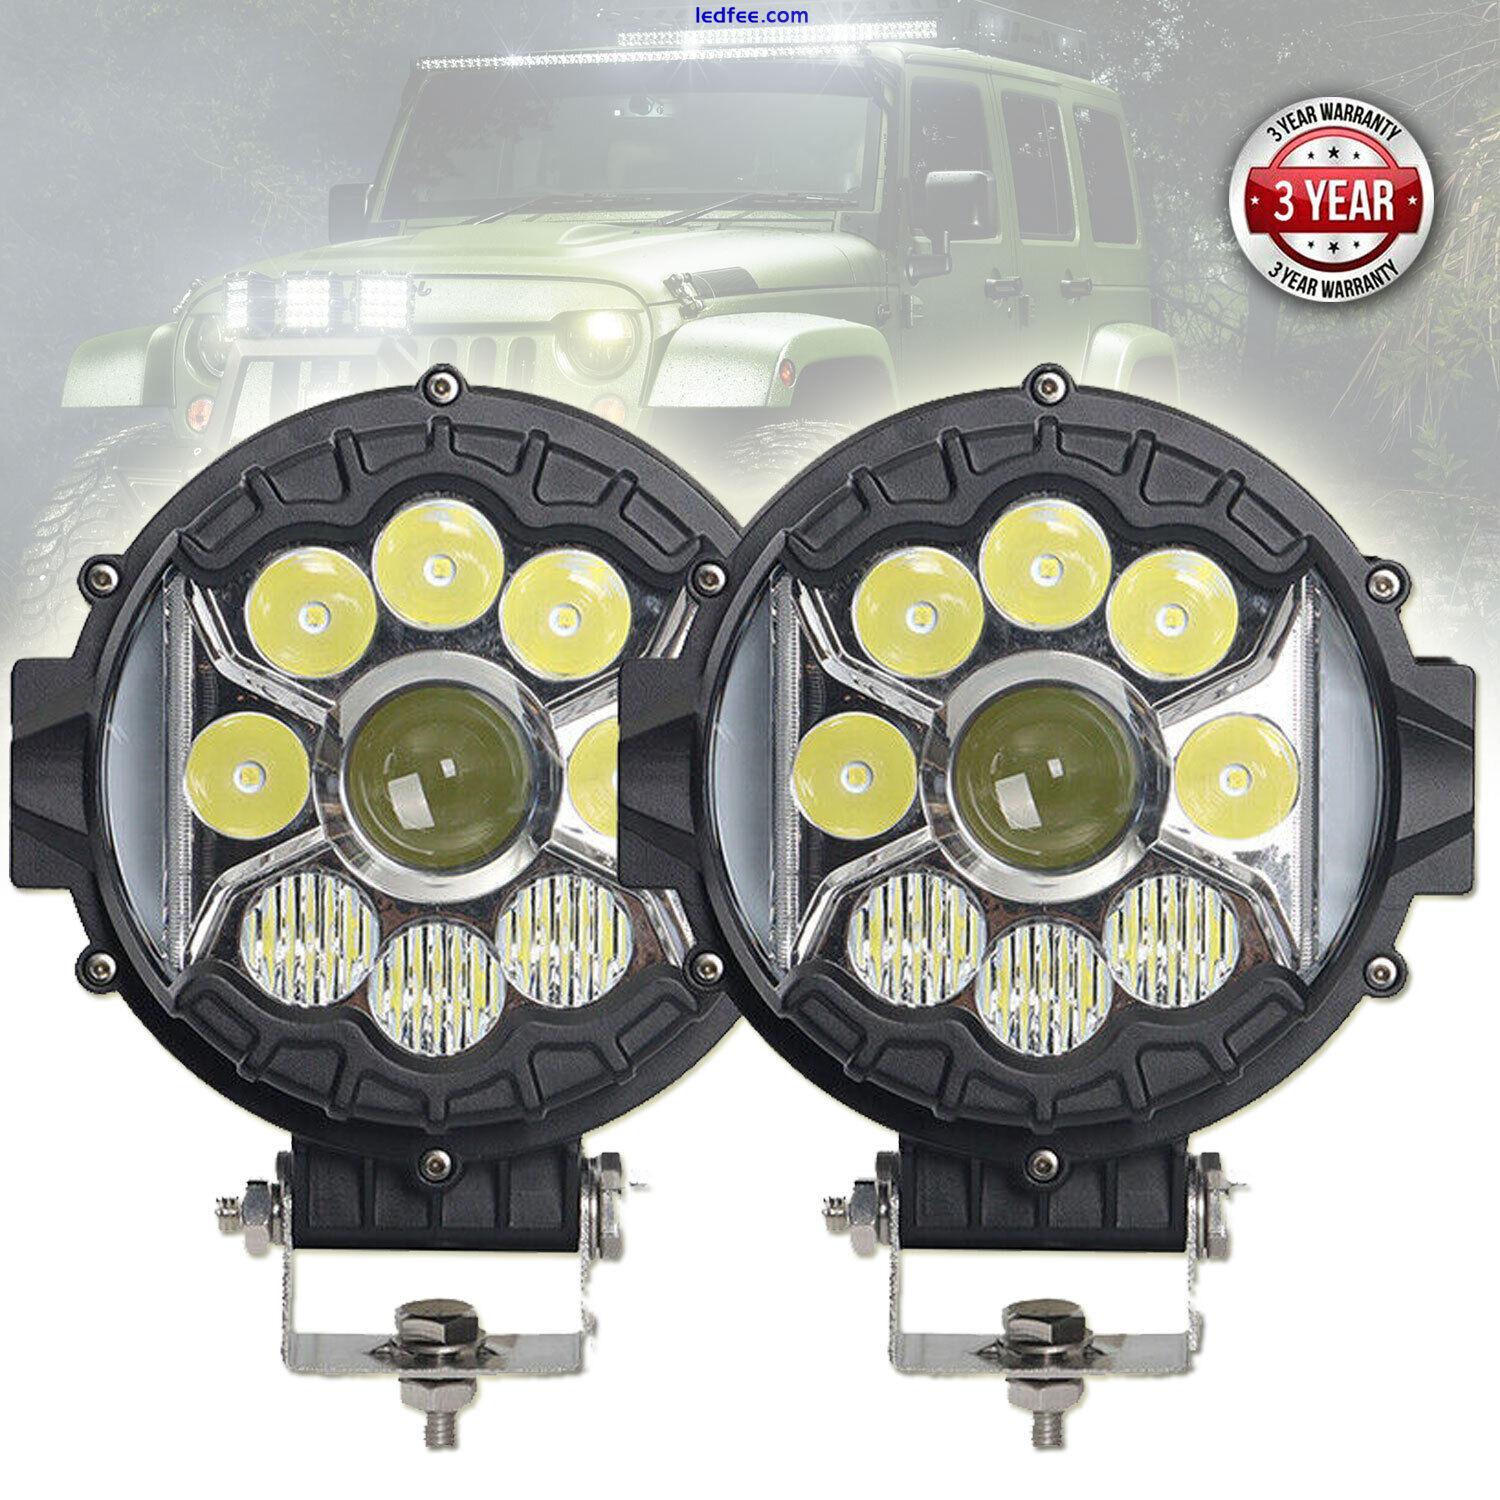 8x Round 7" 80W Led Light Bar Side Shooter DRL Fog Driving Off-Road Driving Lamp 0 